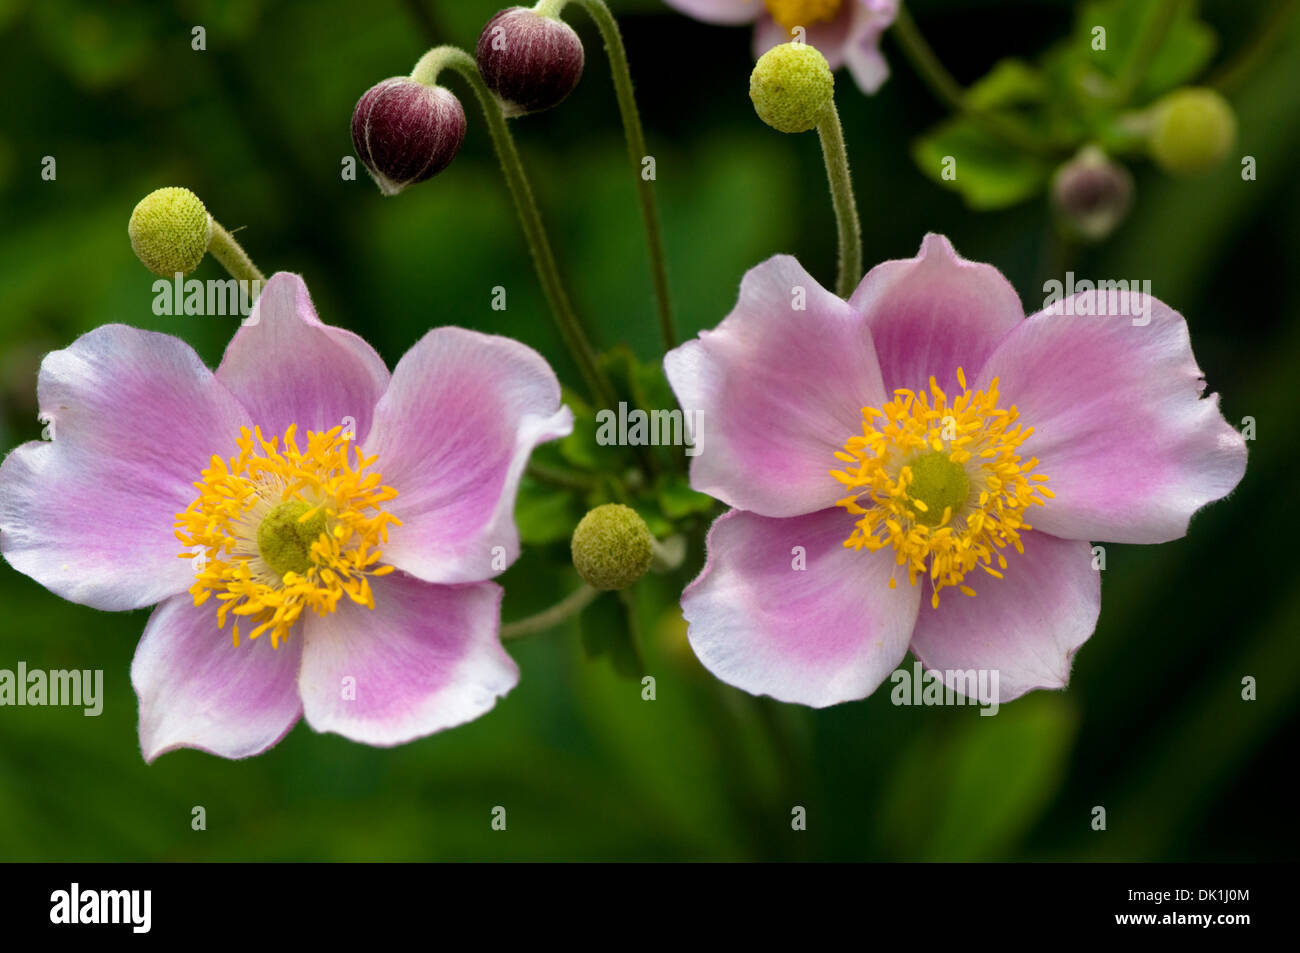 Macro image of two Japanese anemone flower, close-up with its' pink and white delicate petals and pollen filled yellow center. Stock Photo